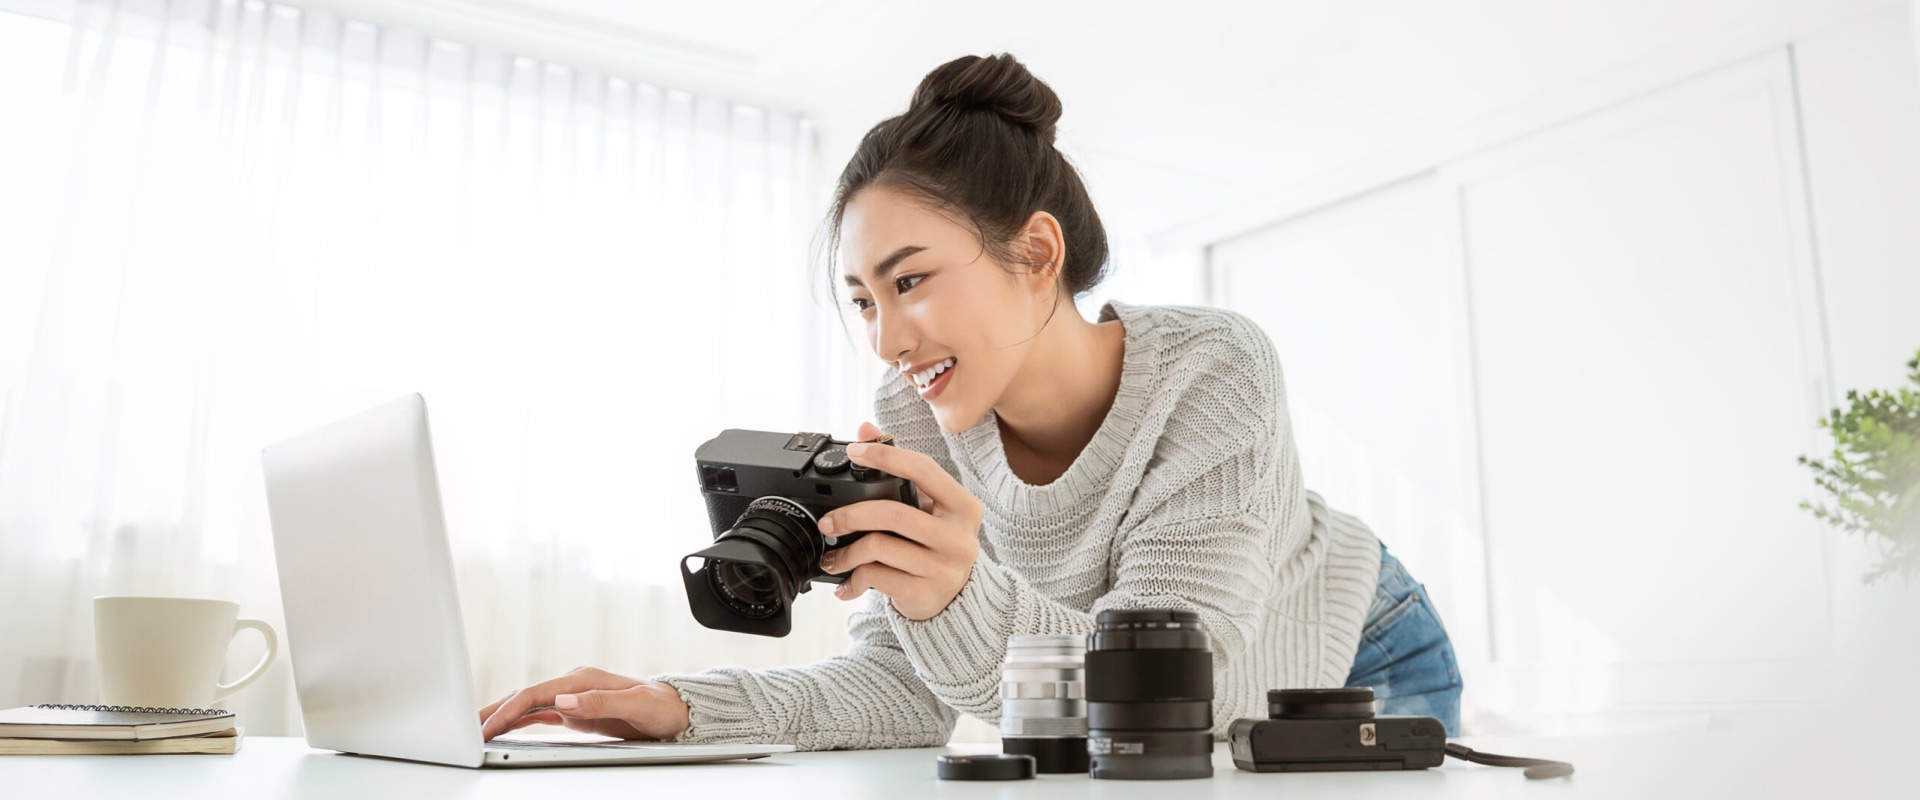 Marketing Yourself as a Photographer